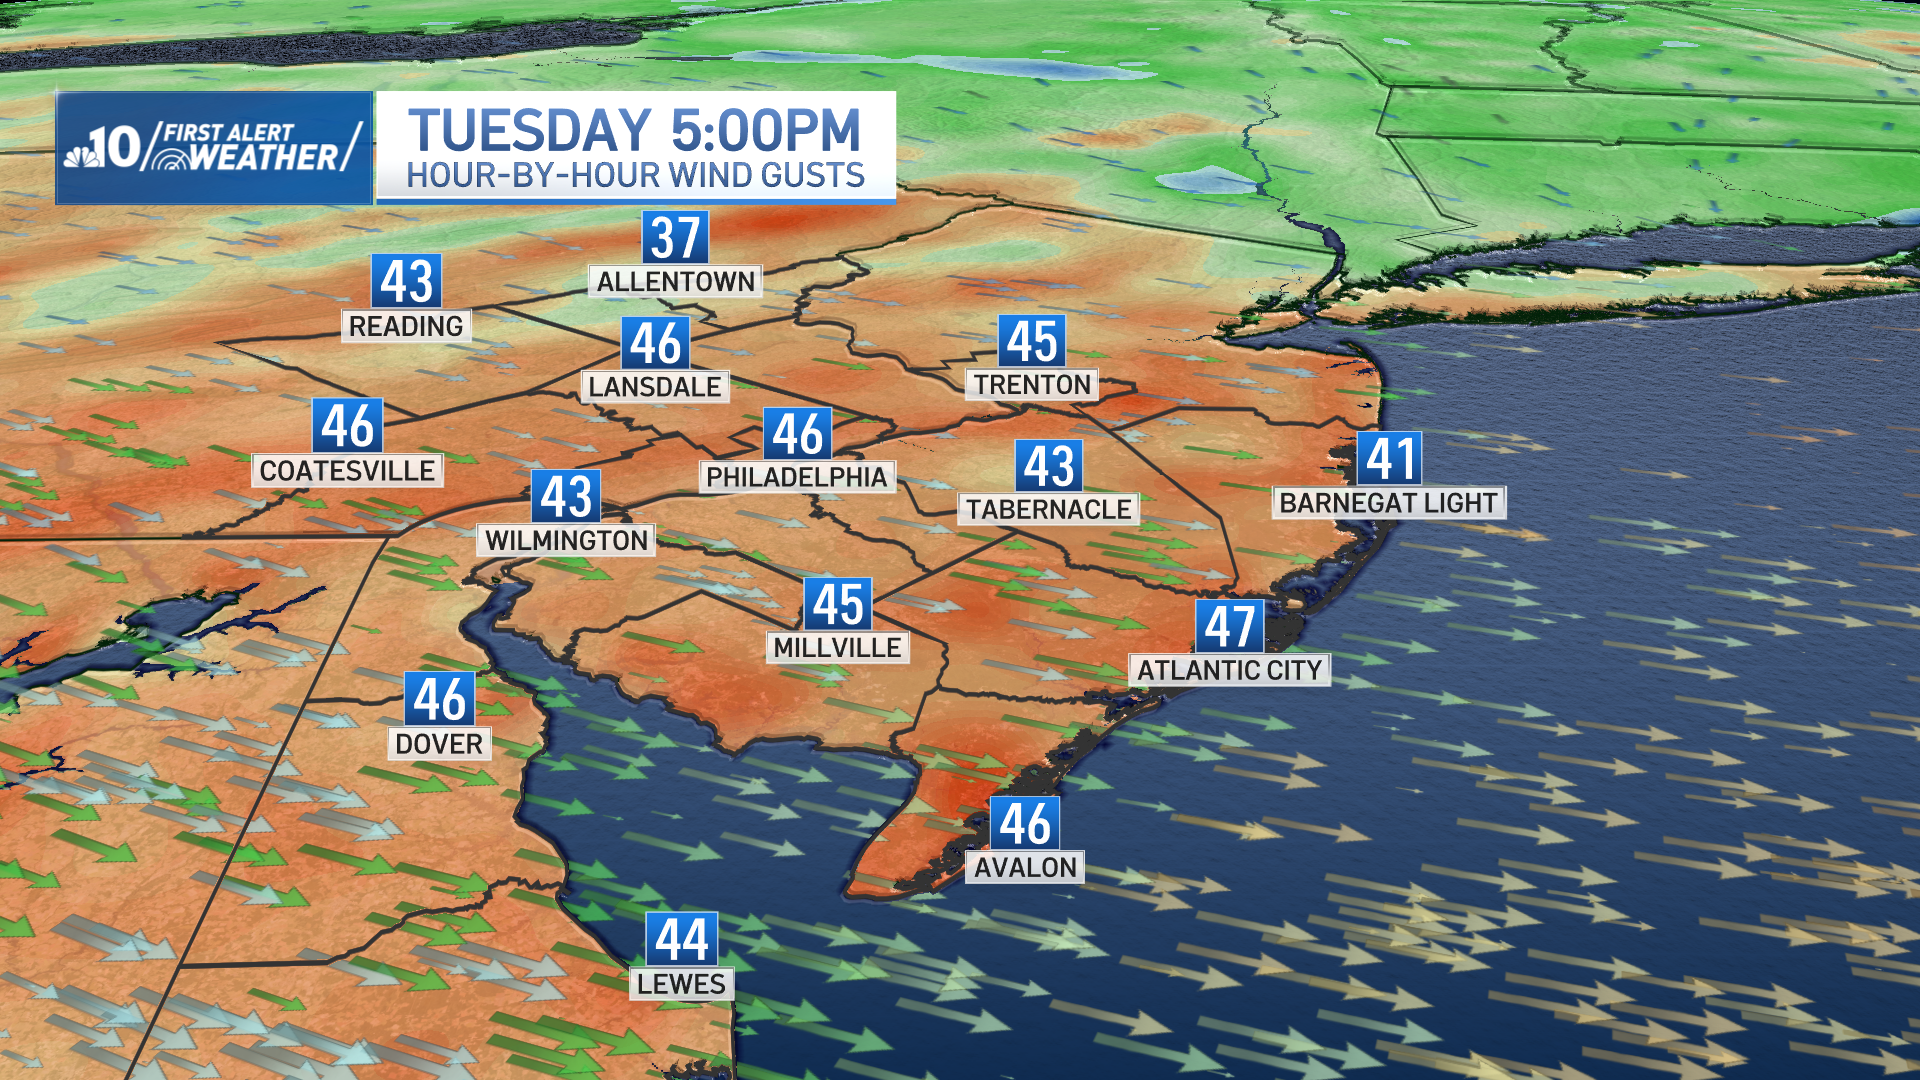 A map shows predicted wind gusts on Tuesday.